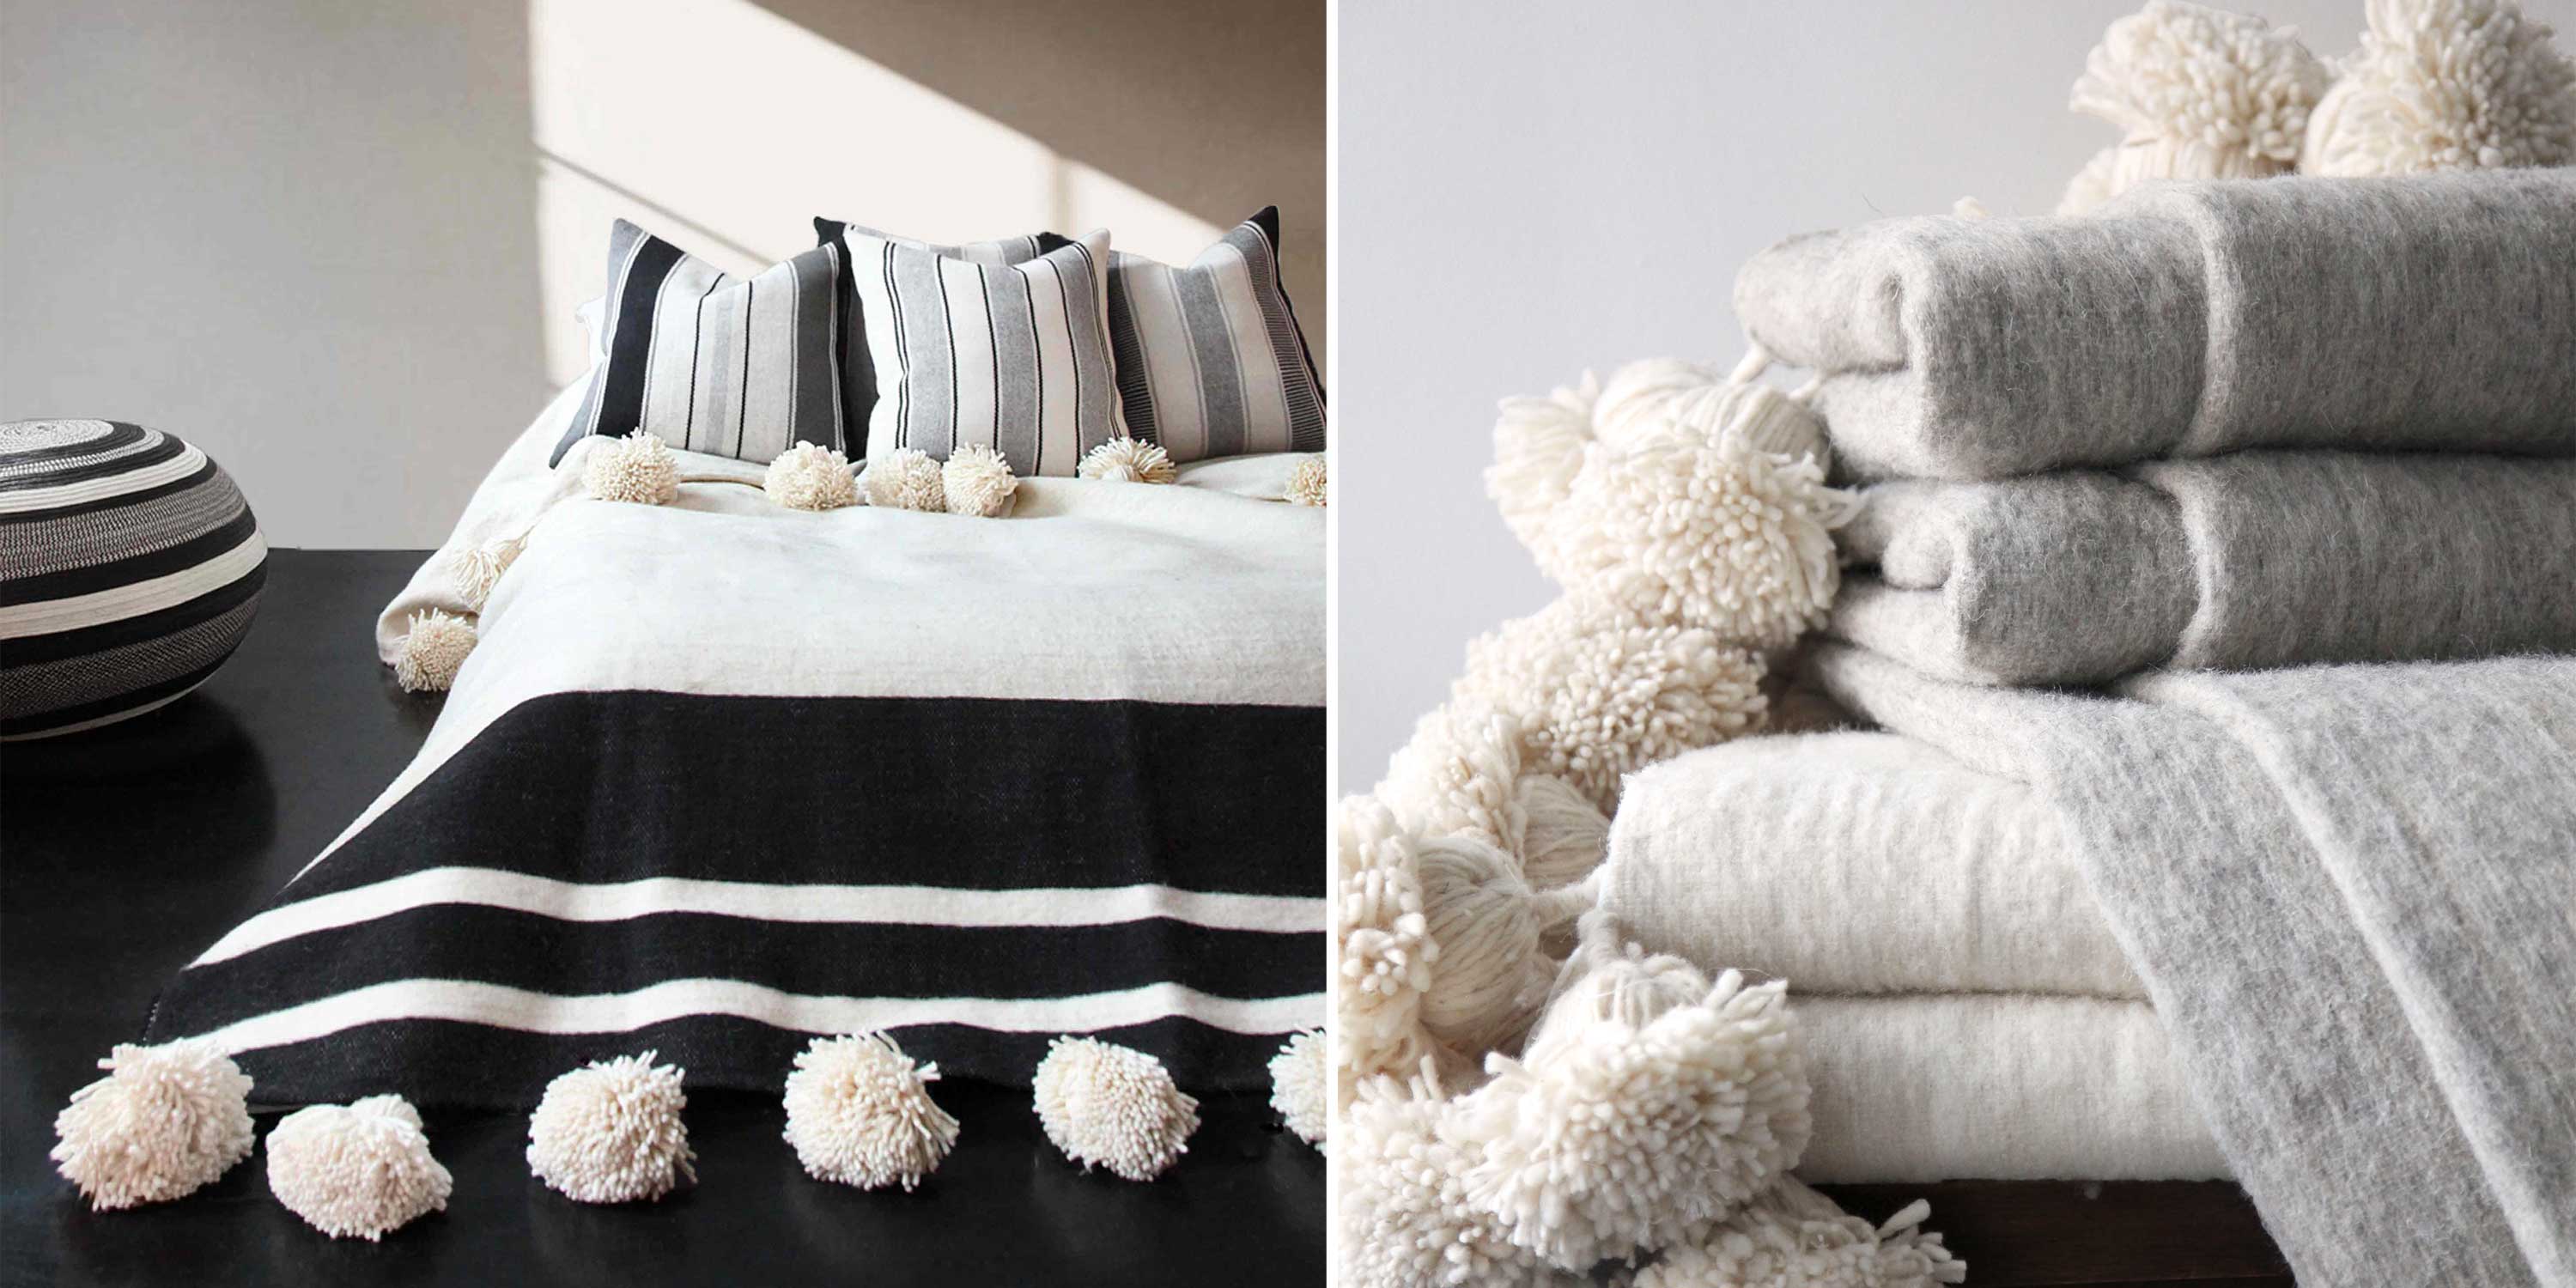 Traditional Moroccan wool blanket with oversized pom poms and alpaca striped throw pillows.